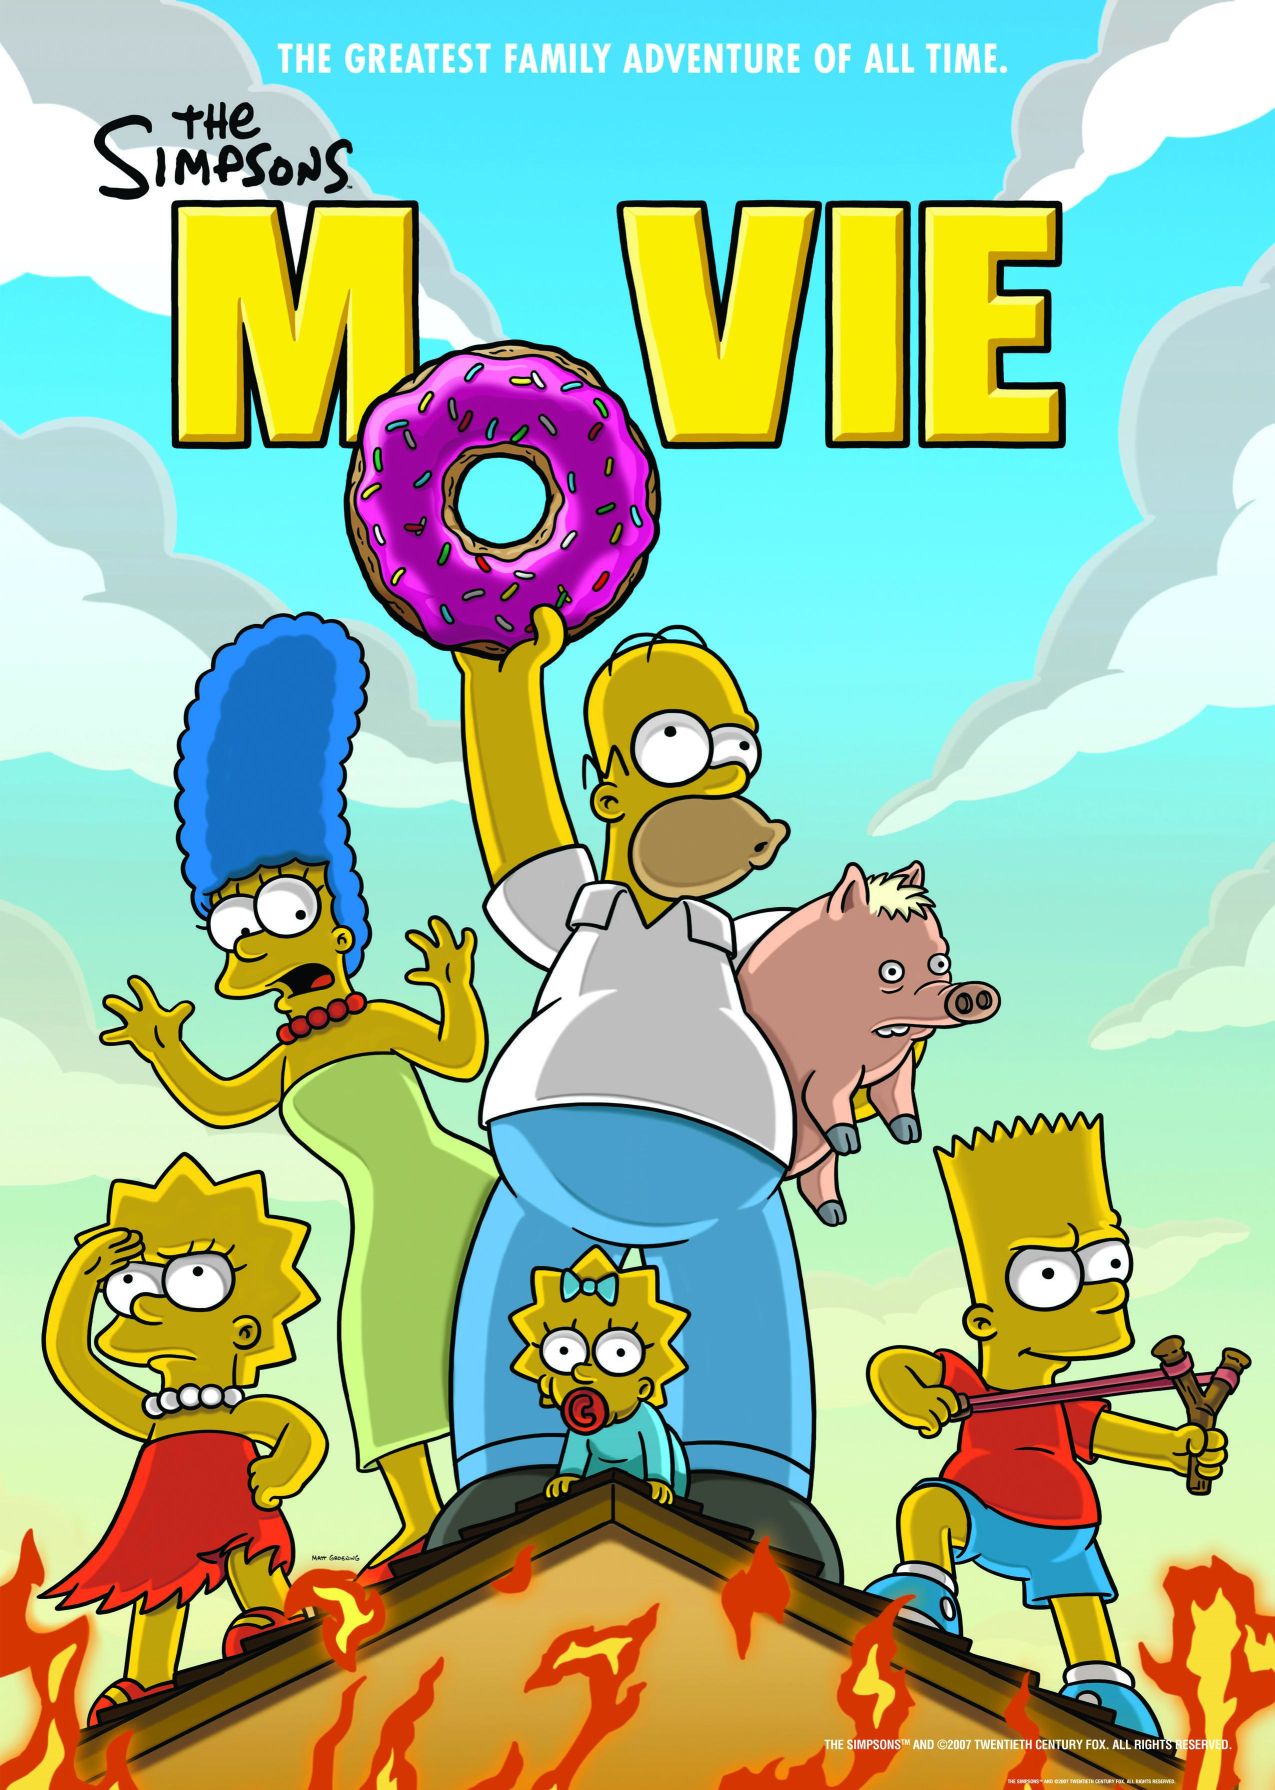 the simpsons movie teaser poster